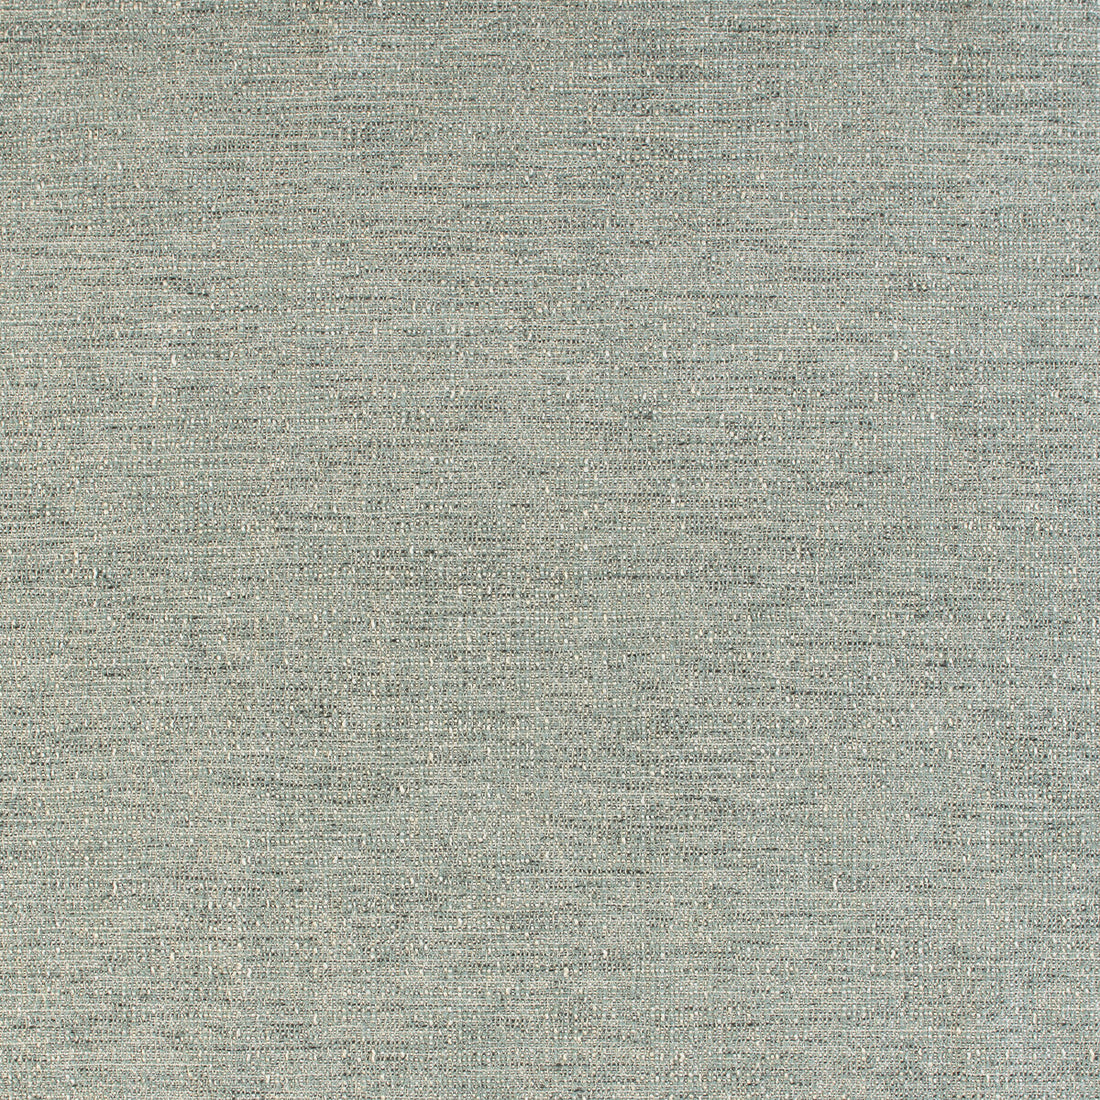 Pebble Path fabric in oasis color - pattern 35907.23.0 - by Kravet Design in the Barbara Barry Home Midsummer collection